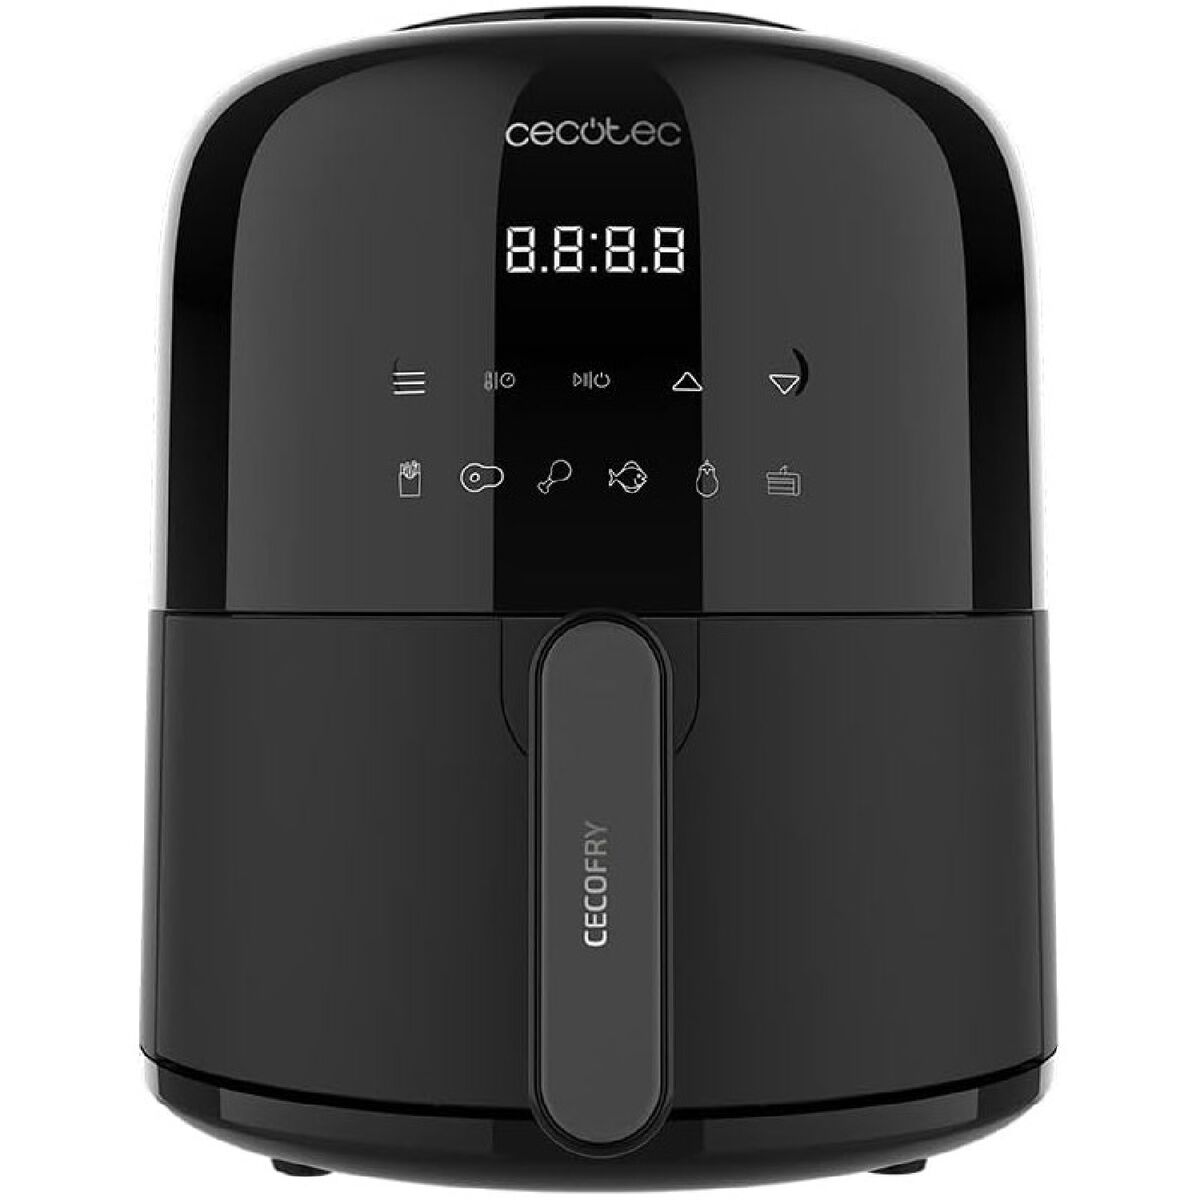 Fritteuse ohne Öl Cecotec Cecofry Pixel 2500 Touch 1200 W 2,5 L - CA International 